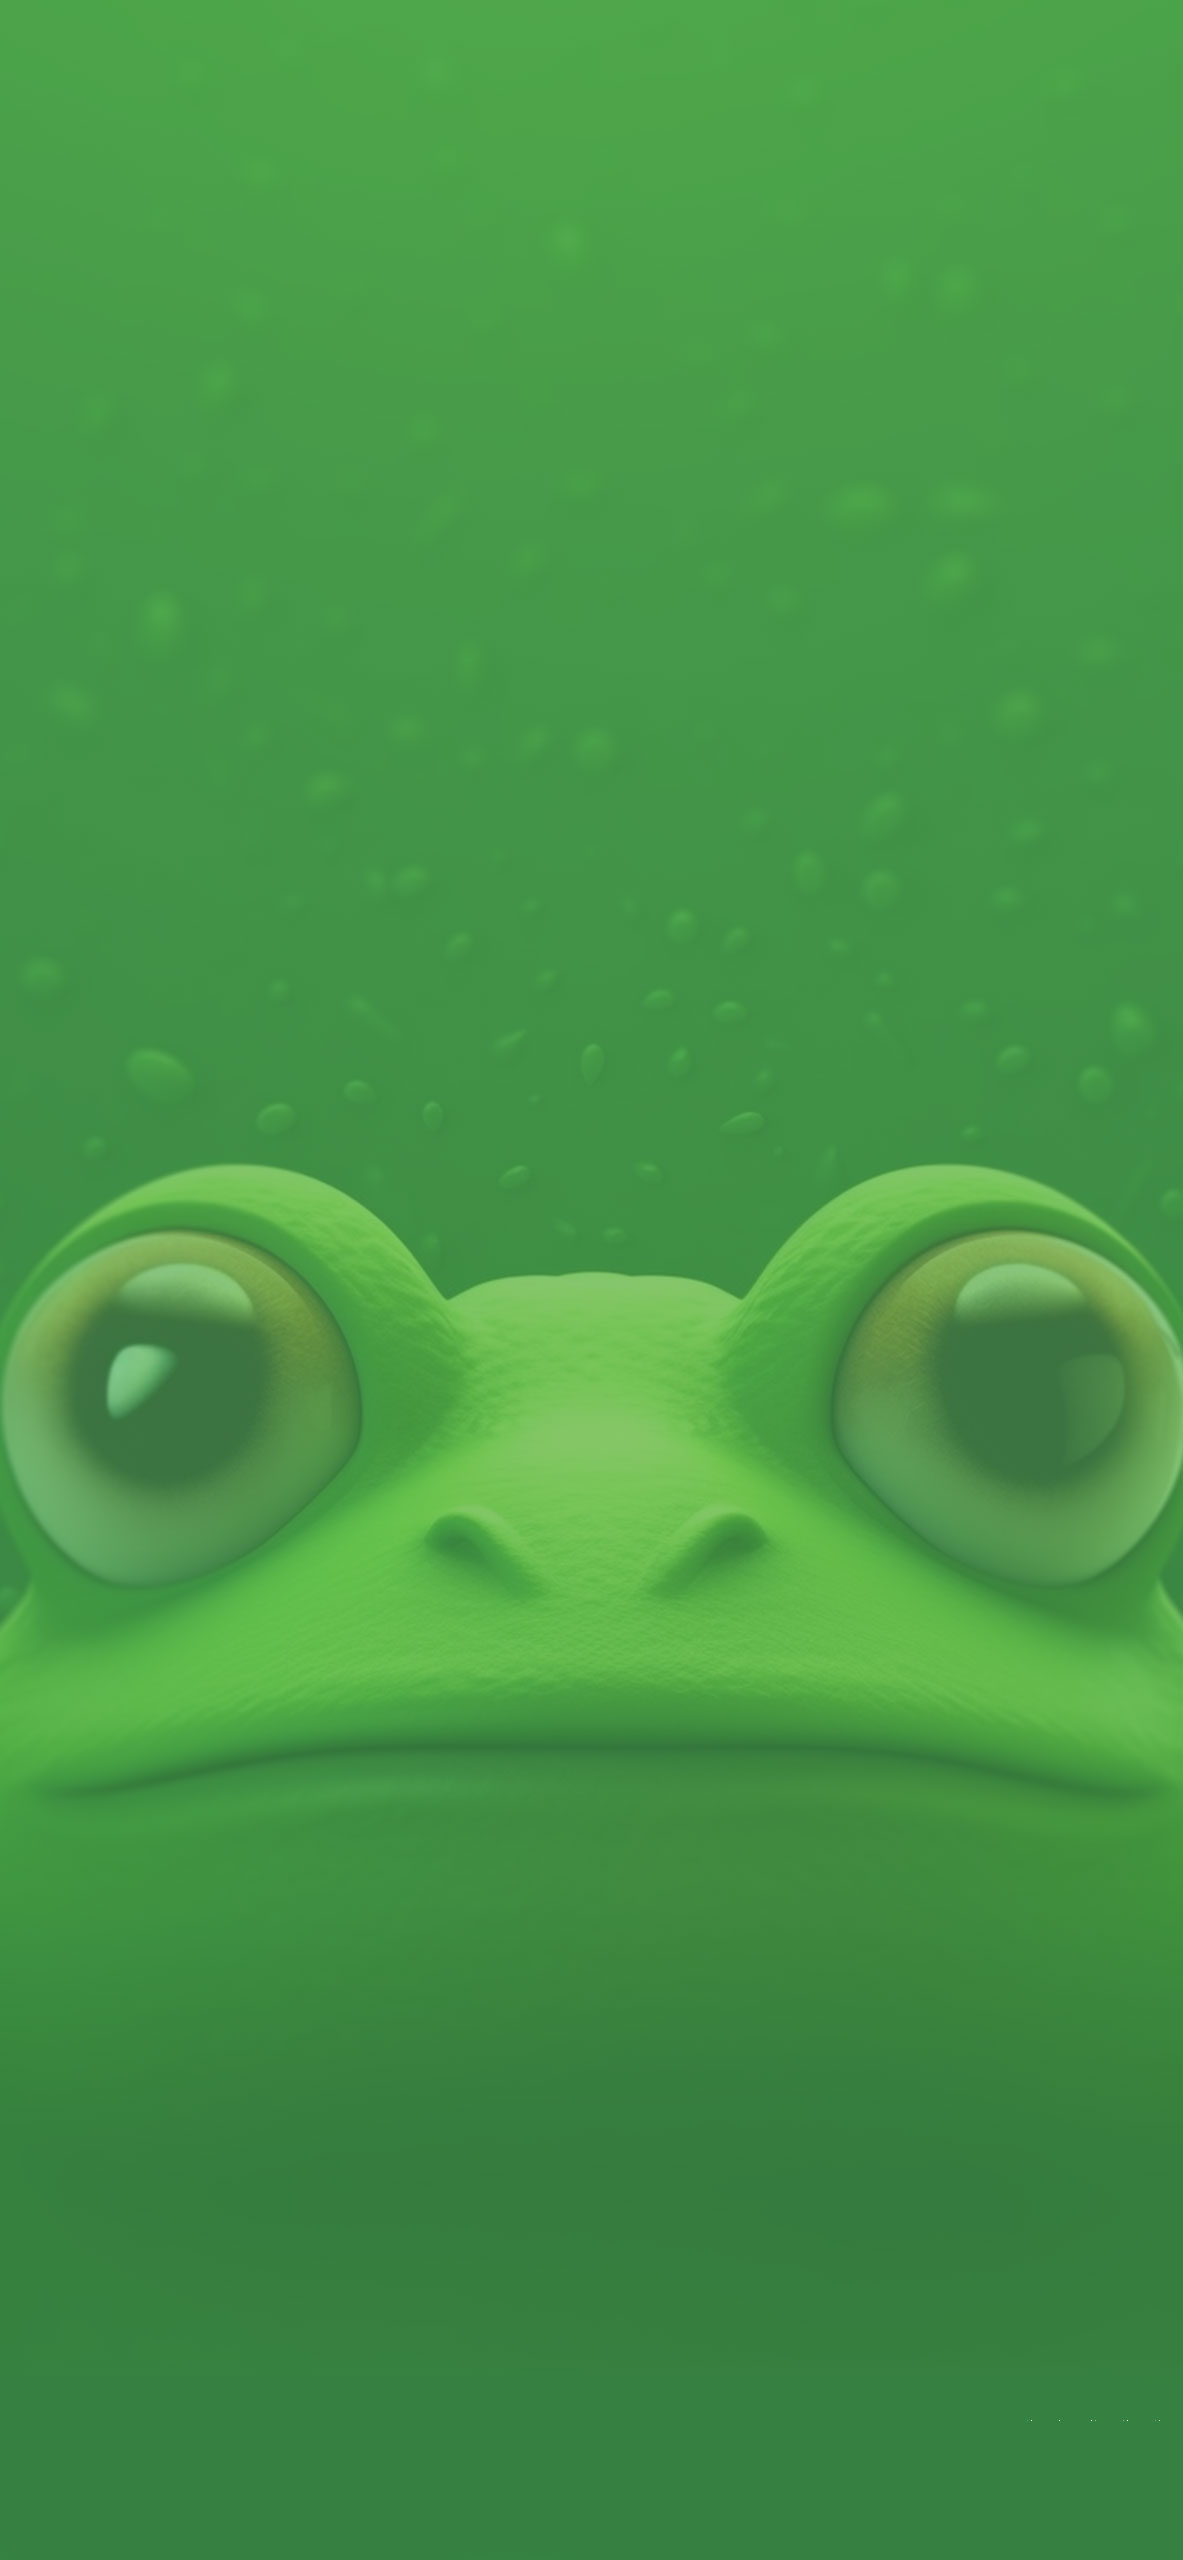 3D Frog Green Wallpapers Cute Frog Wallpaper for iPhone